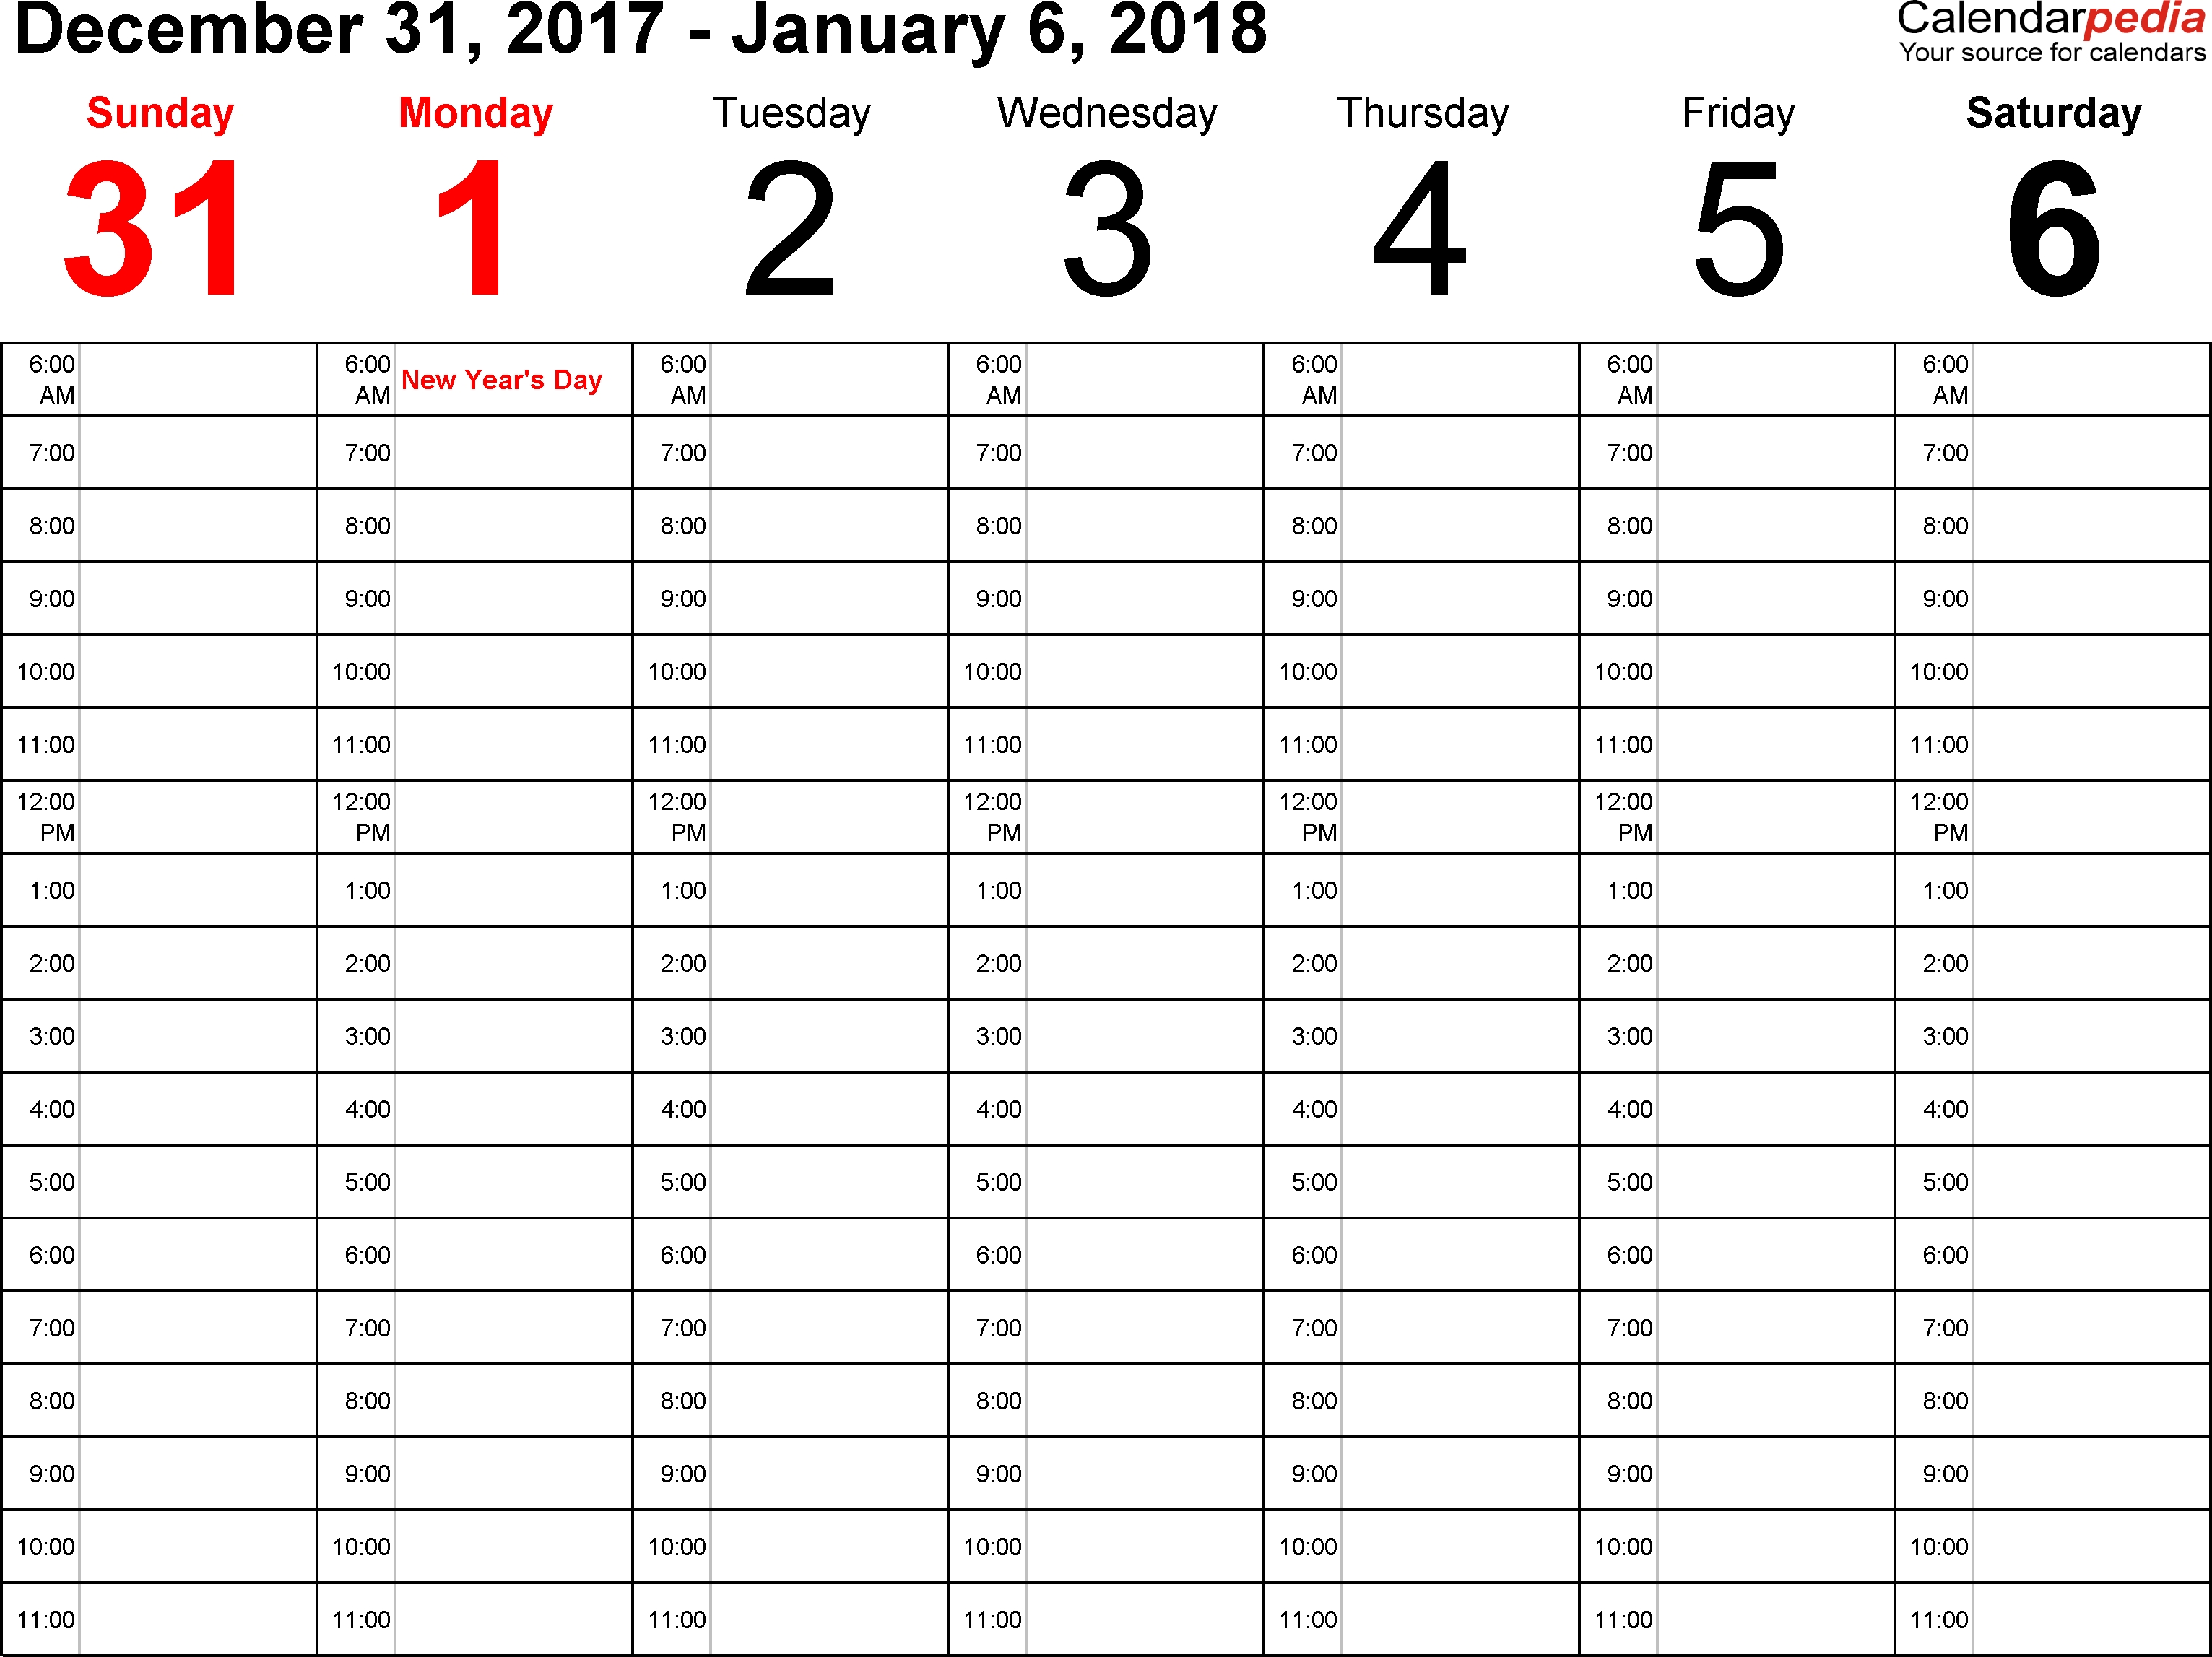 Weekly Calendar 2018 For Word - 12 Free Printable Templates pertaining to Weekly Calendar With Yearly And Monthy Agenda